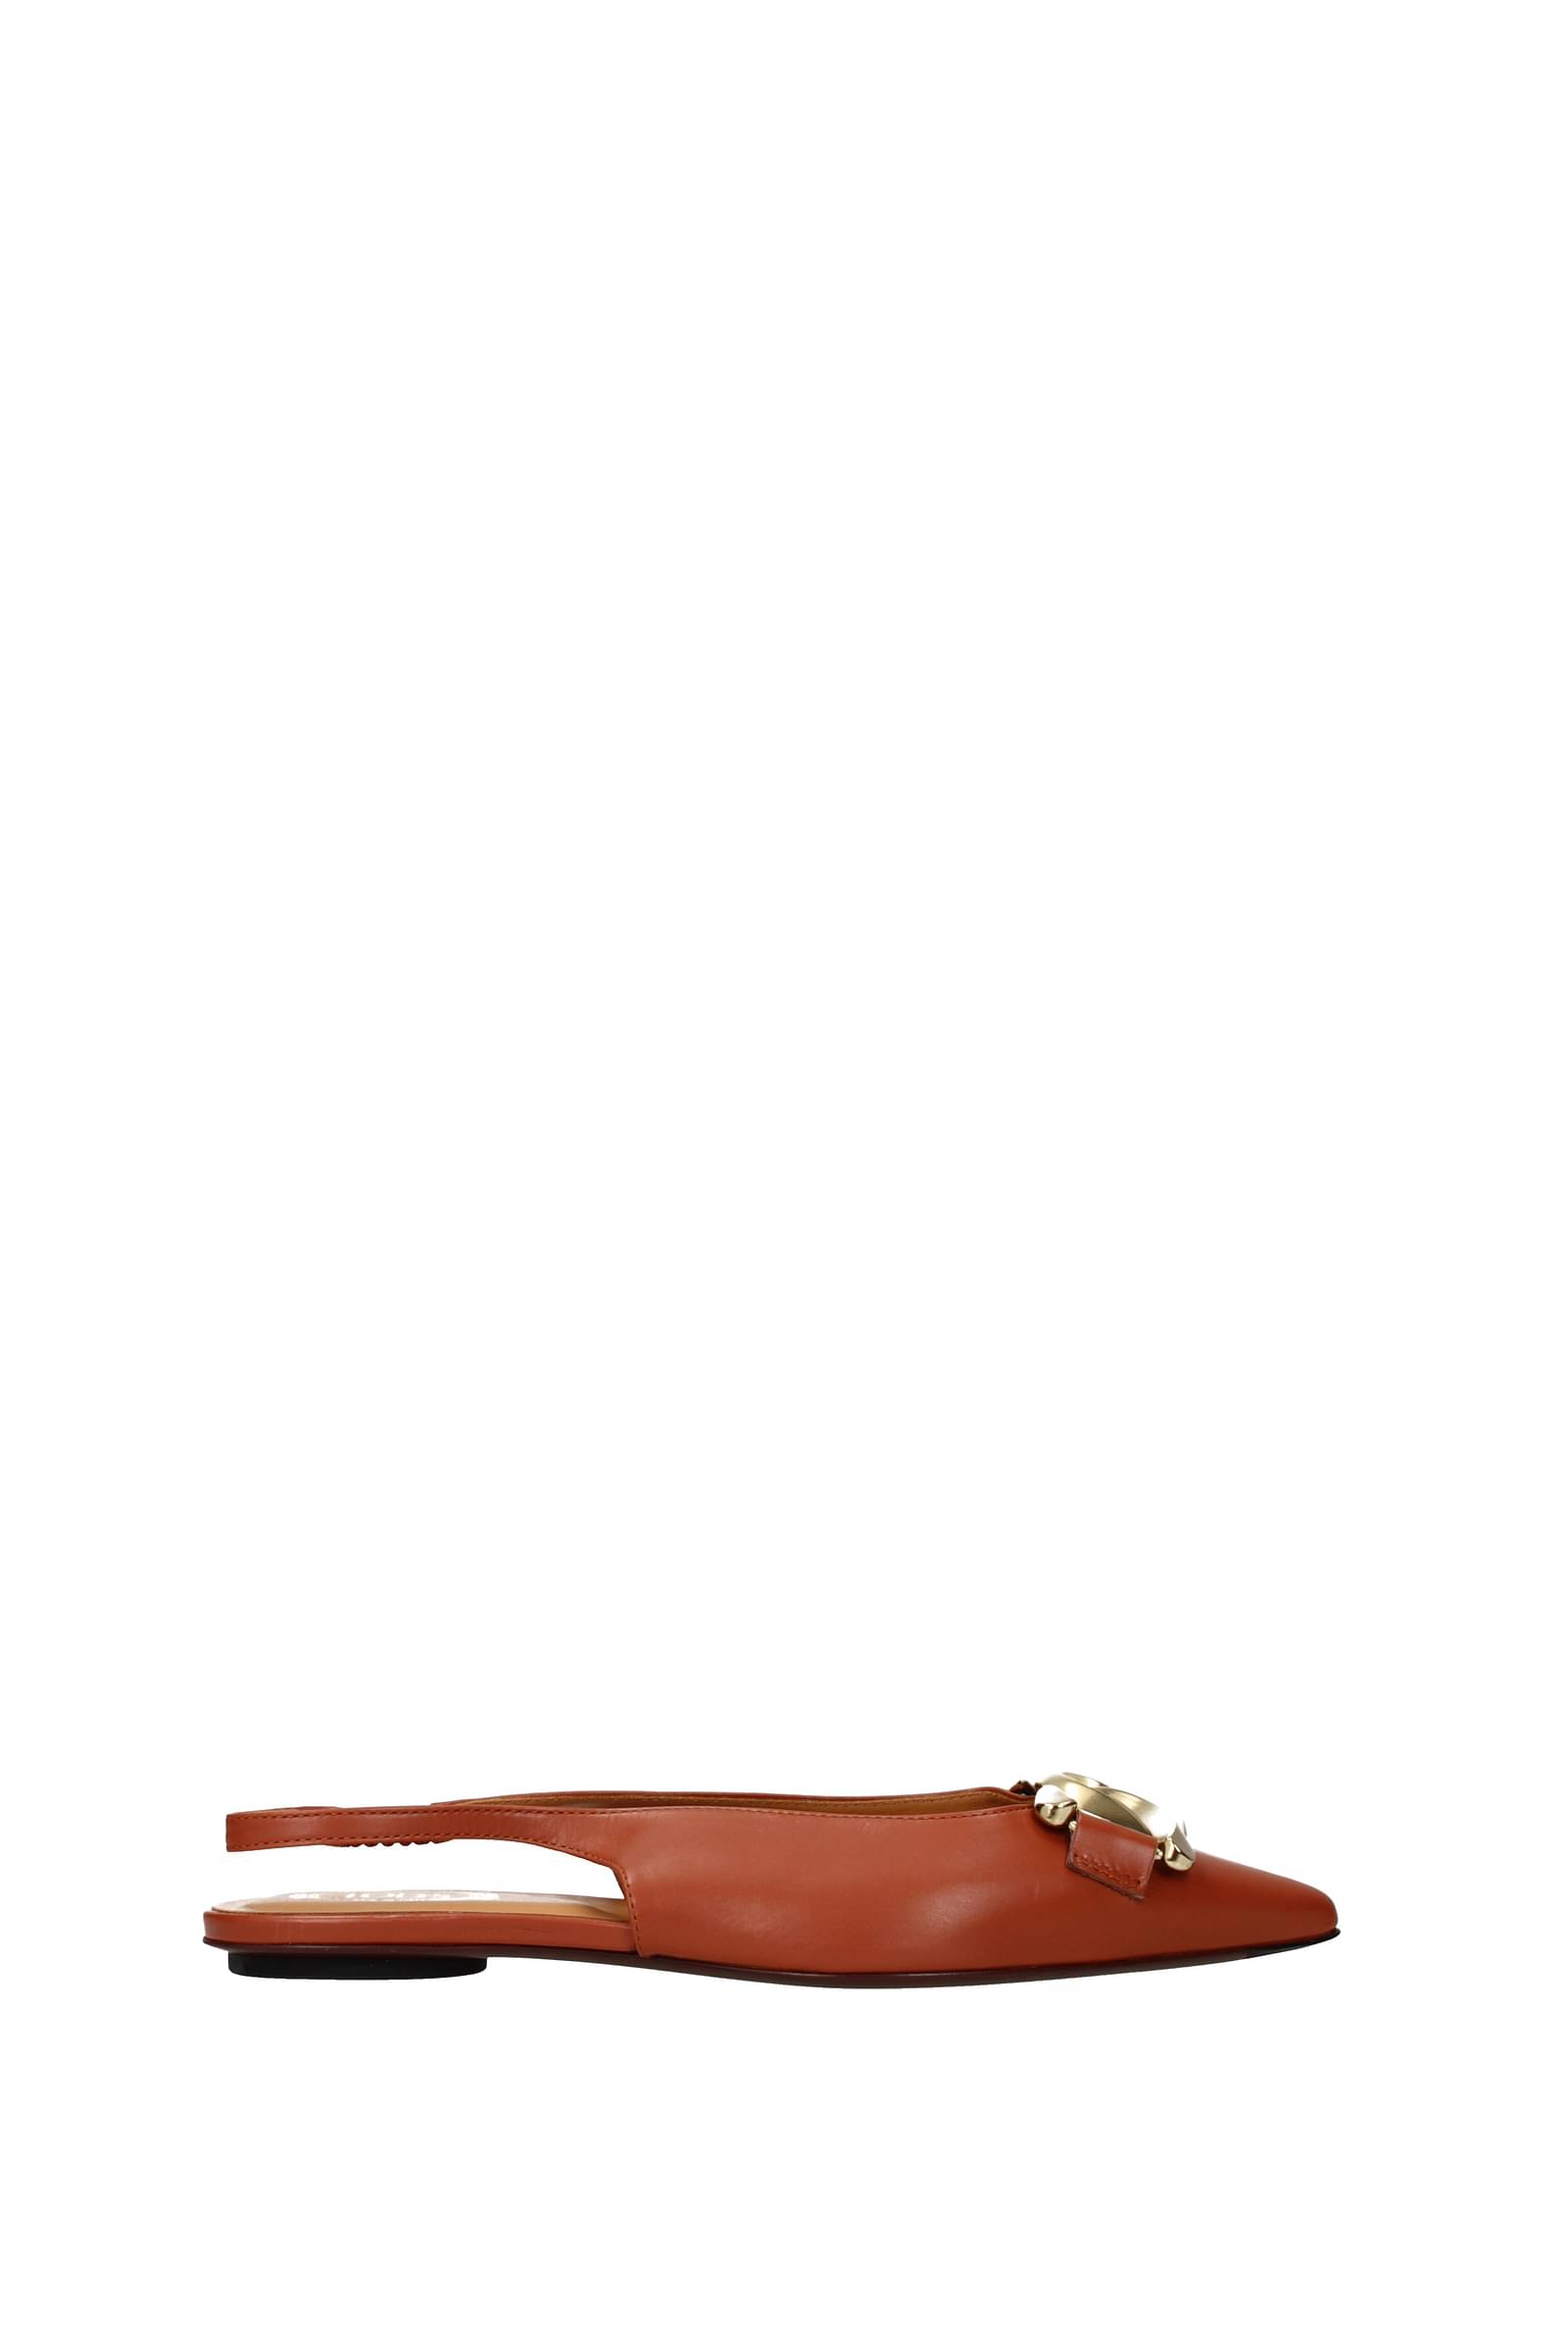 Tod's outlet: shoes and bags on sale up to -60% off